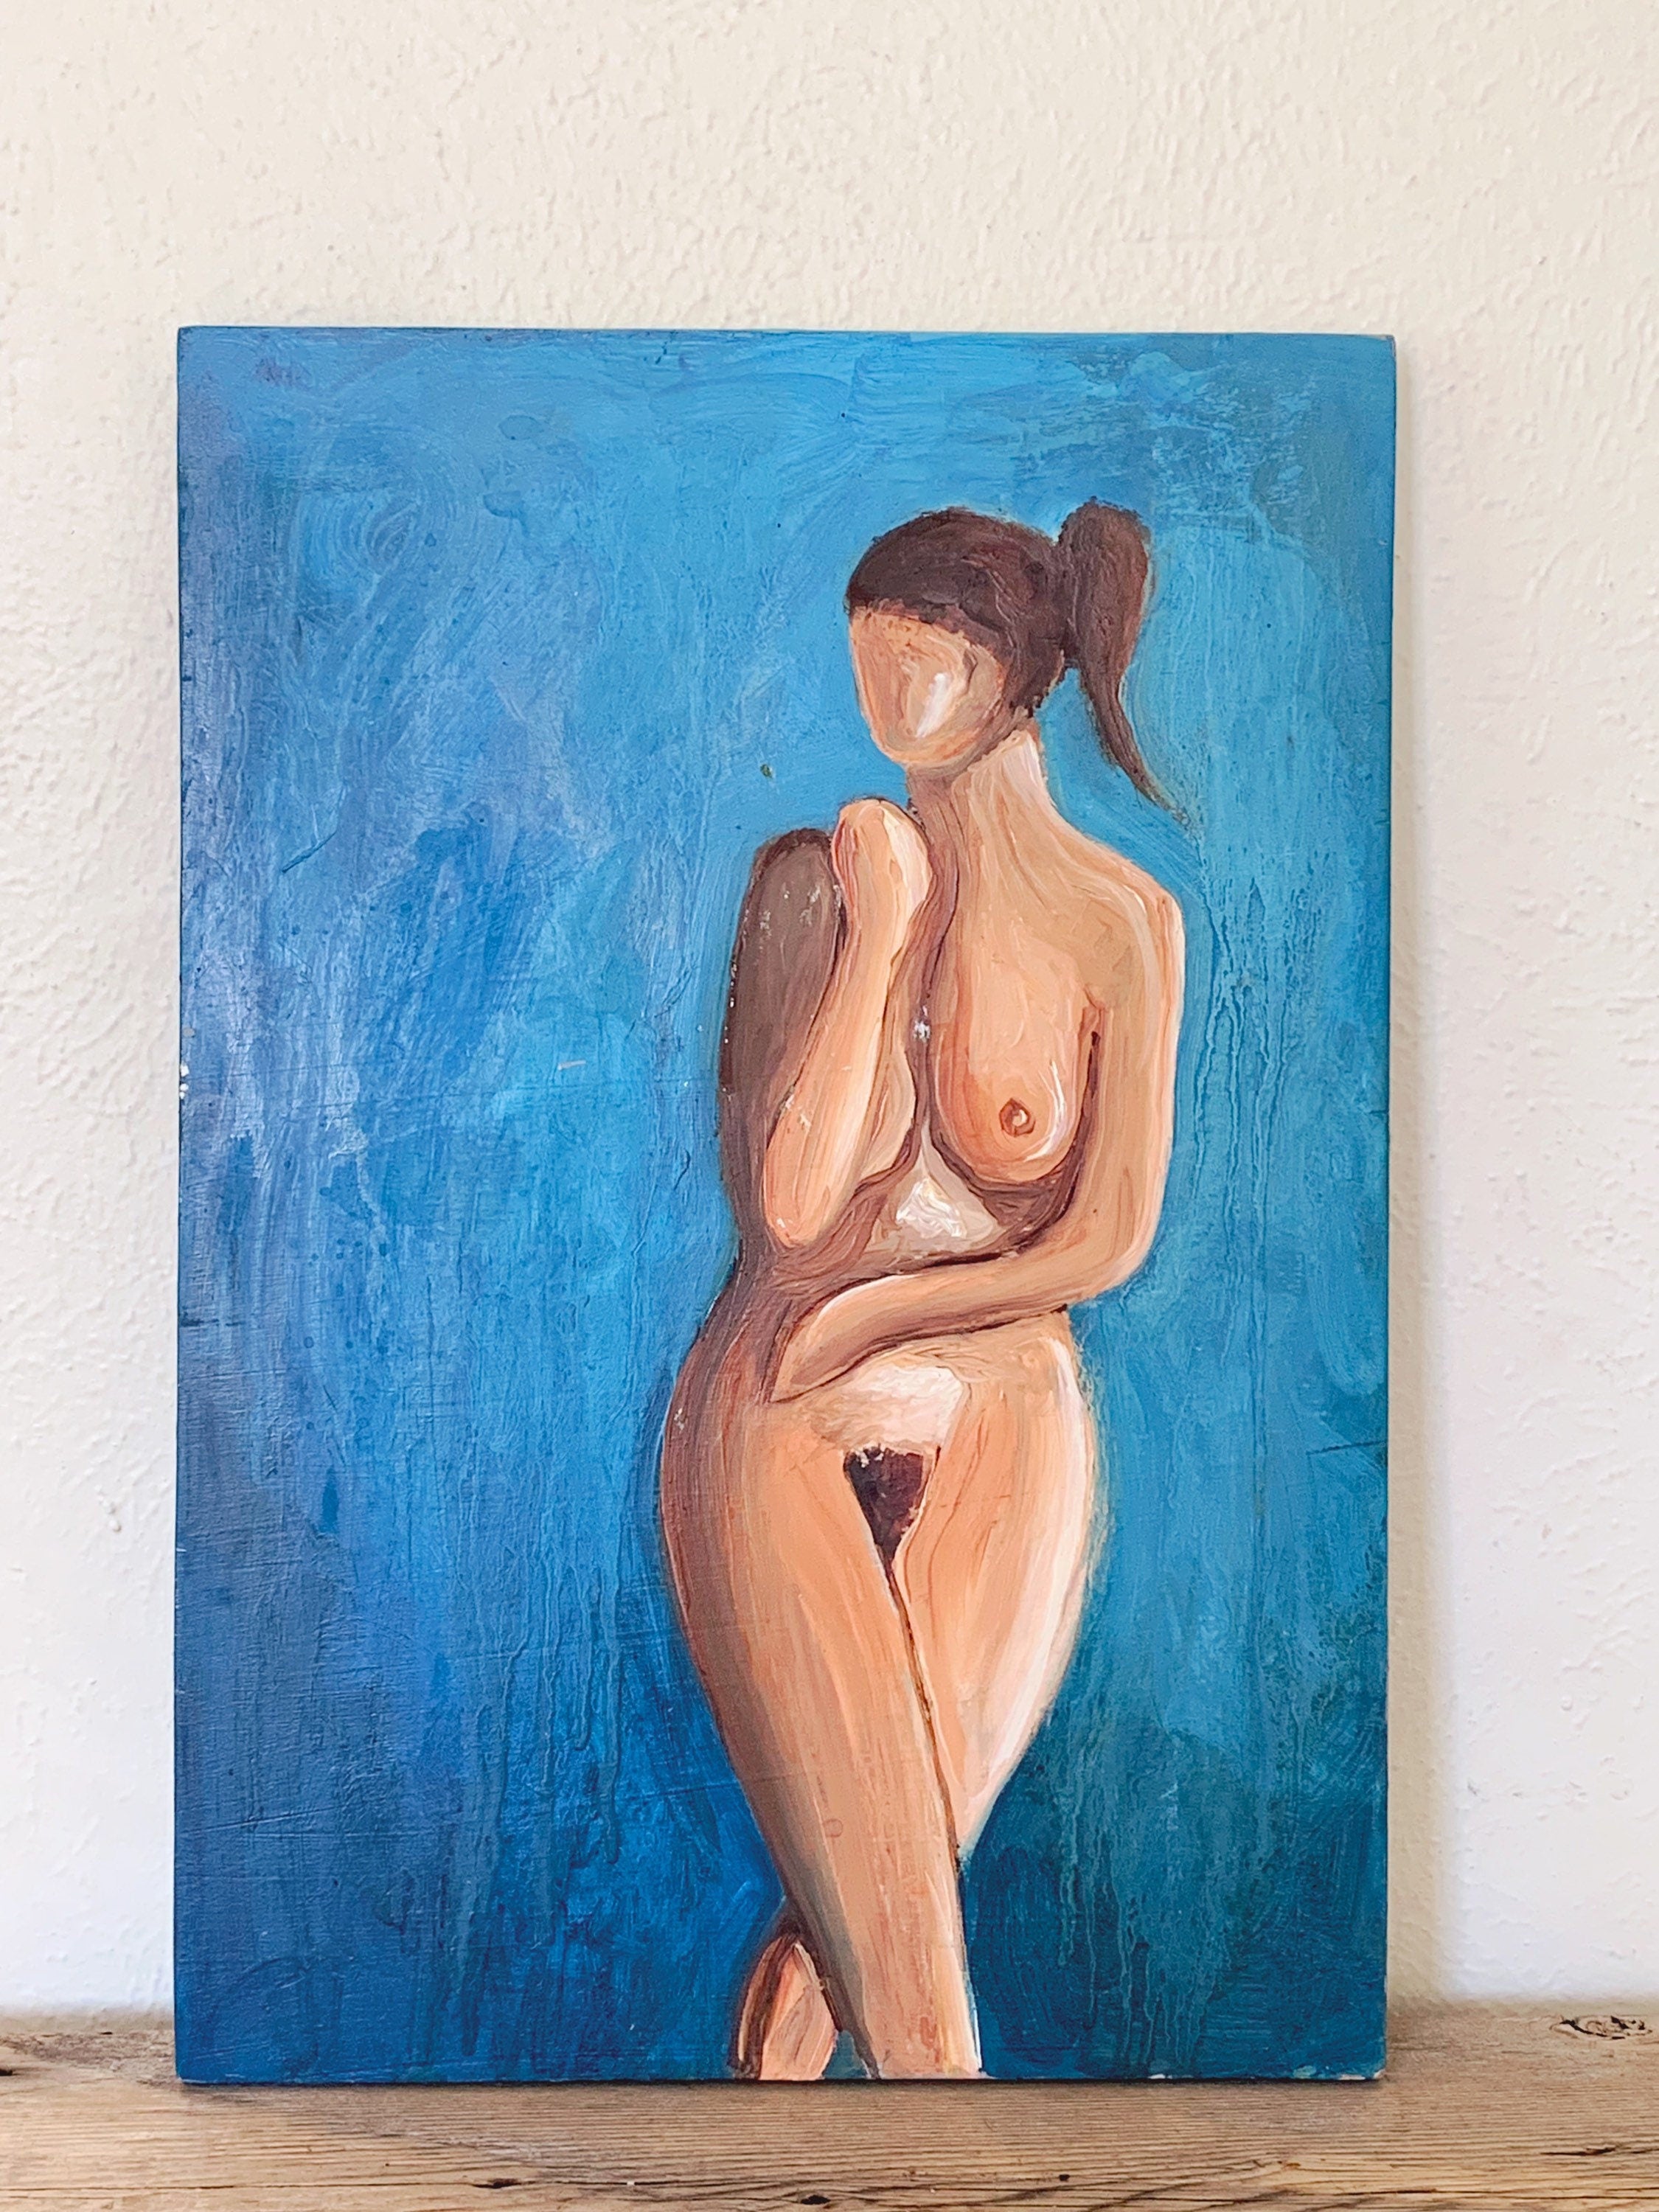 Original Oil Paintings of Nude Male and Female Figures | EACH SOLD SEPERATELY | Vintage Modernist Art Oil on Board | Home Decor Wall Art